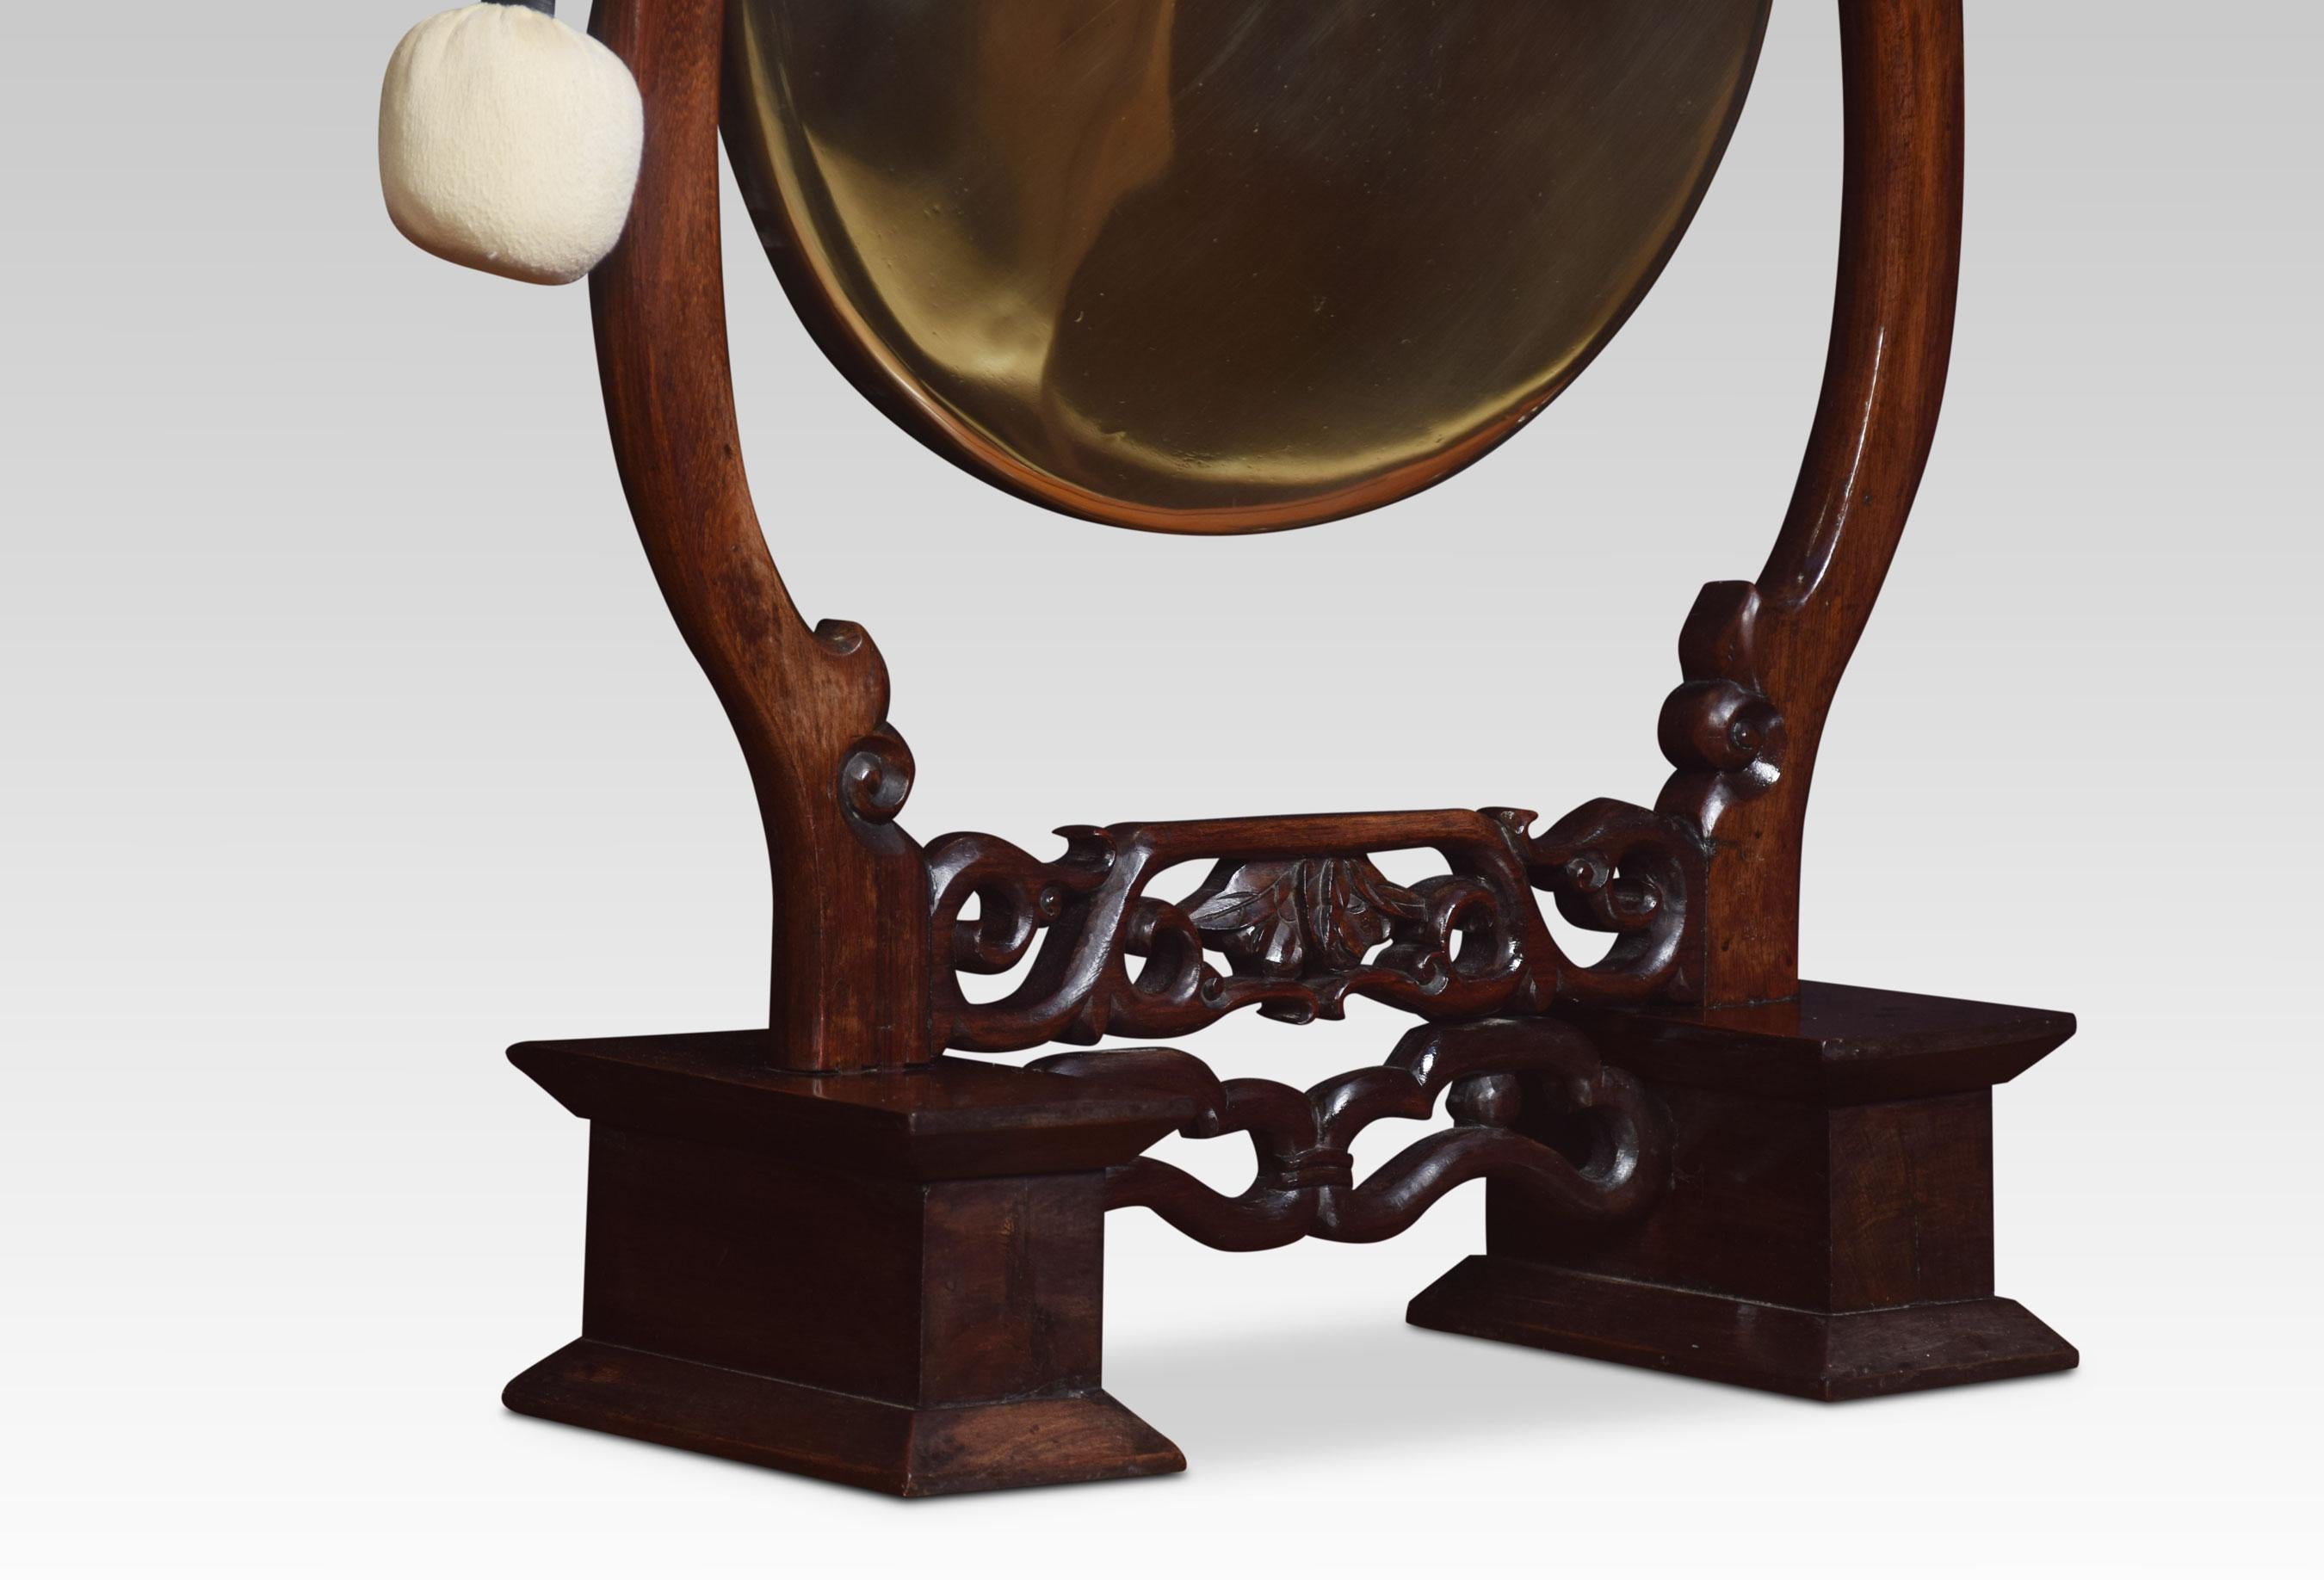 Chinese hardwood framed dinner gong, the frame carved with scrolls supporting the original brass gong. Together with beater.
Dimensions:
Height 34 inches
Width 18.5 inches
Depth 8 inches.